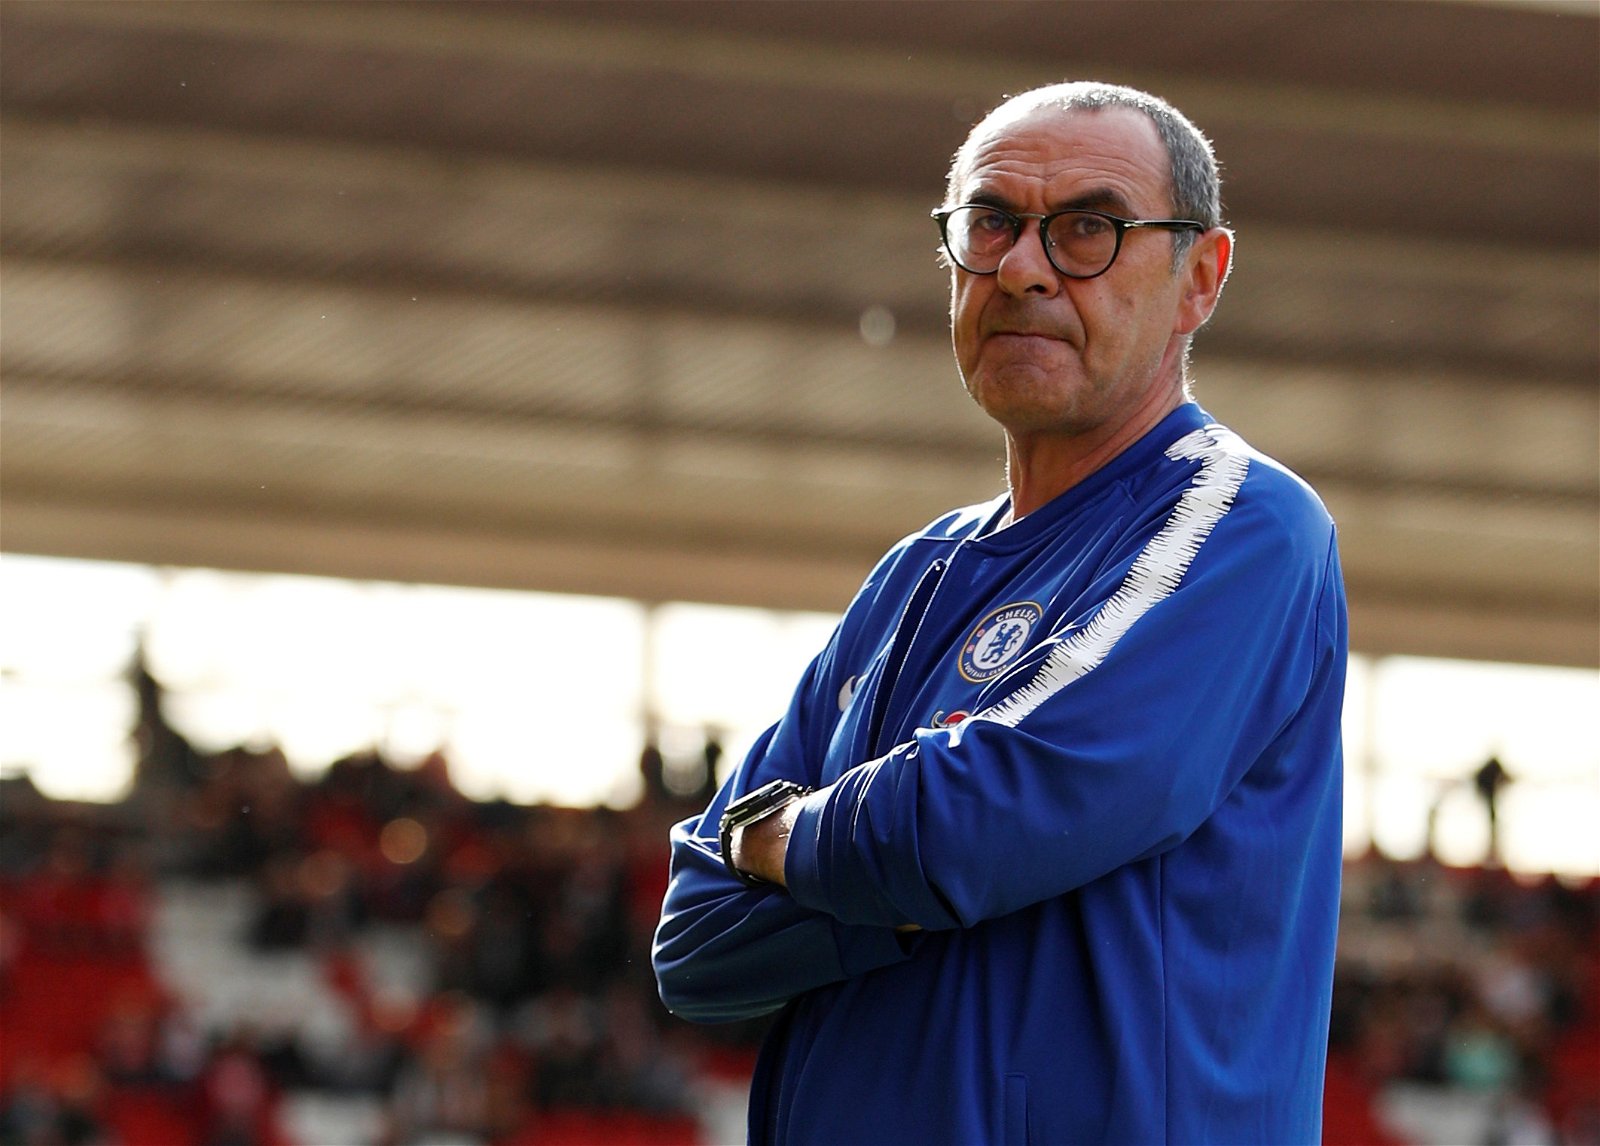 Sarri says that Chelsea are performing at 60-70% of their capability